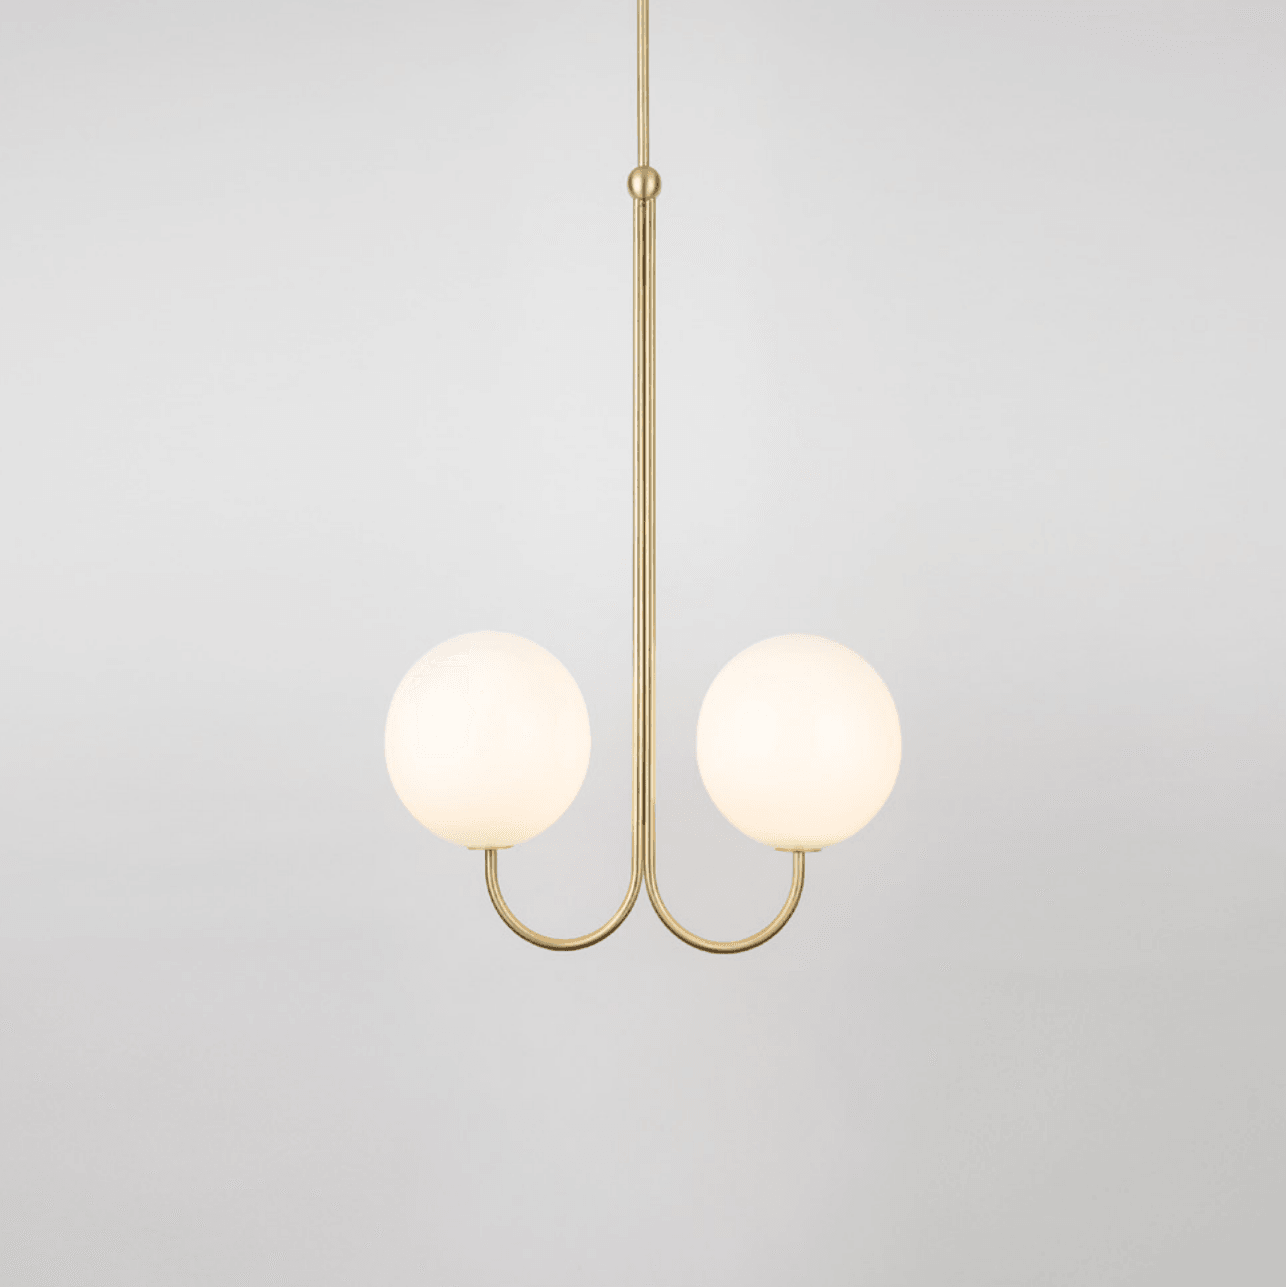 Polished Brass Angle Pendant Light measuring 16.92 inches in diameter and 24.96 inches in height (43cm x 63.4 cm)